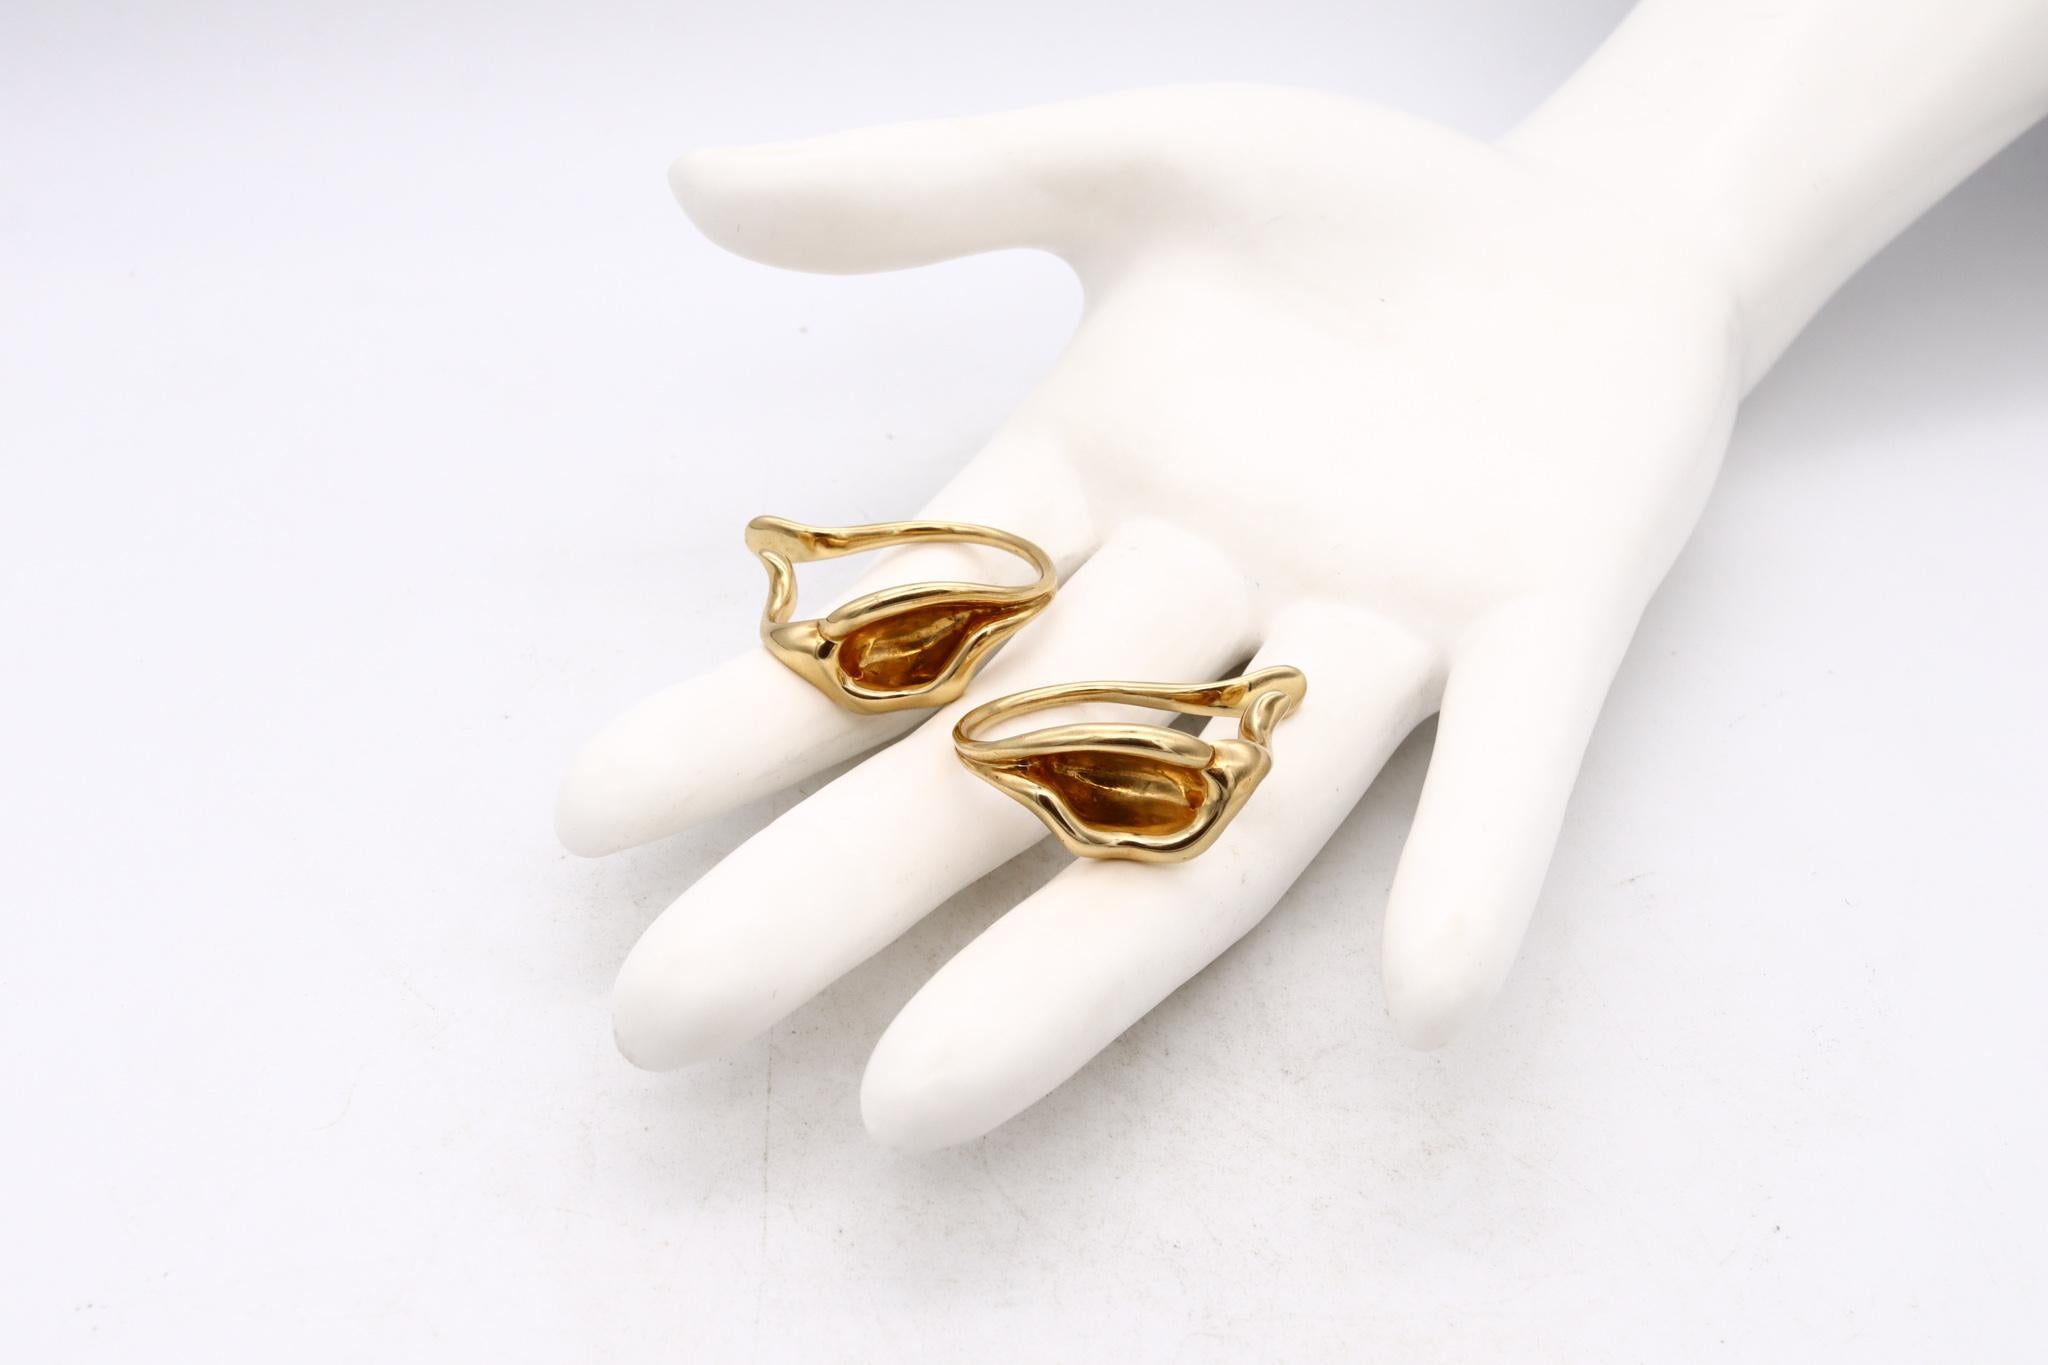 Tiffany Co. by Elsa Peretti Rare Vintage Organic Lilies Earrings Solid 18Kt Gold In Excellent Condition For Sale In Miami, FL